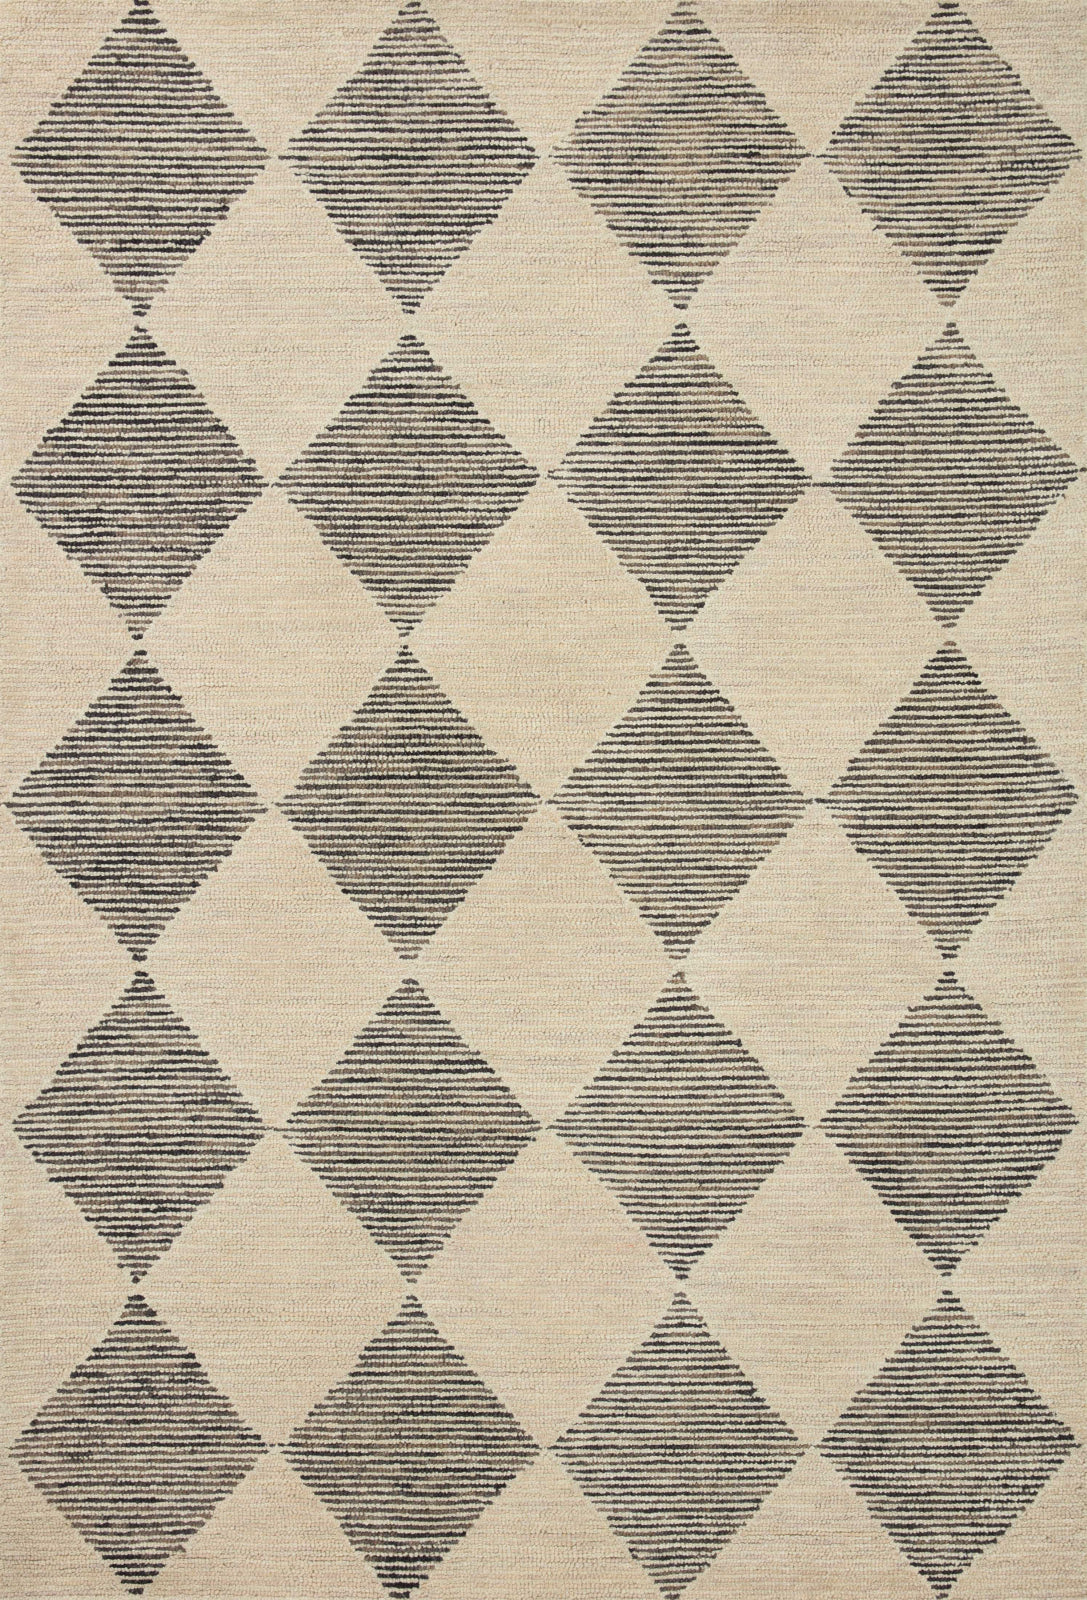 Loloi Francis FRA-01 Beige/Charcoal Area Rug by Chris Loves Julia main image